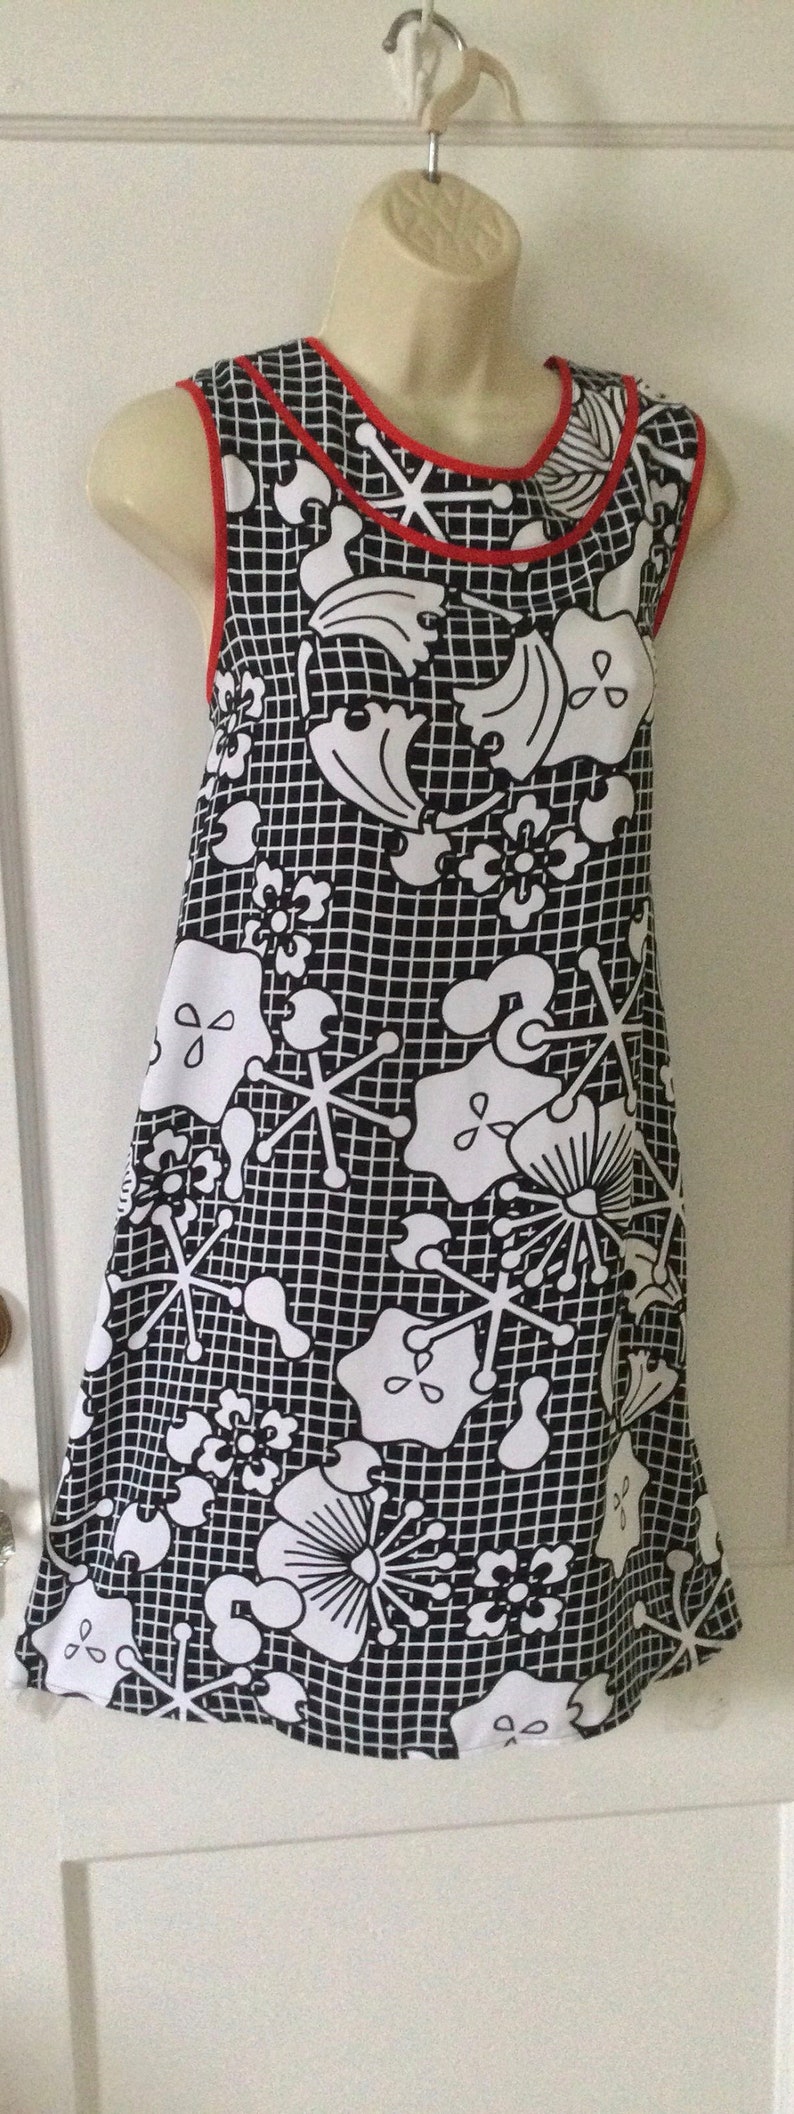 New KENZO Black White Floral Dress NWT Black/White Red Piping Floral Print A-Line KENZO Dress Size 42 image 6